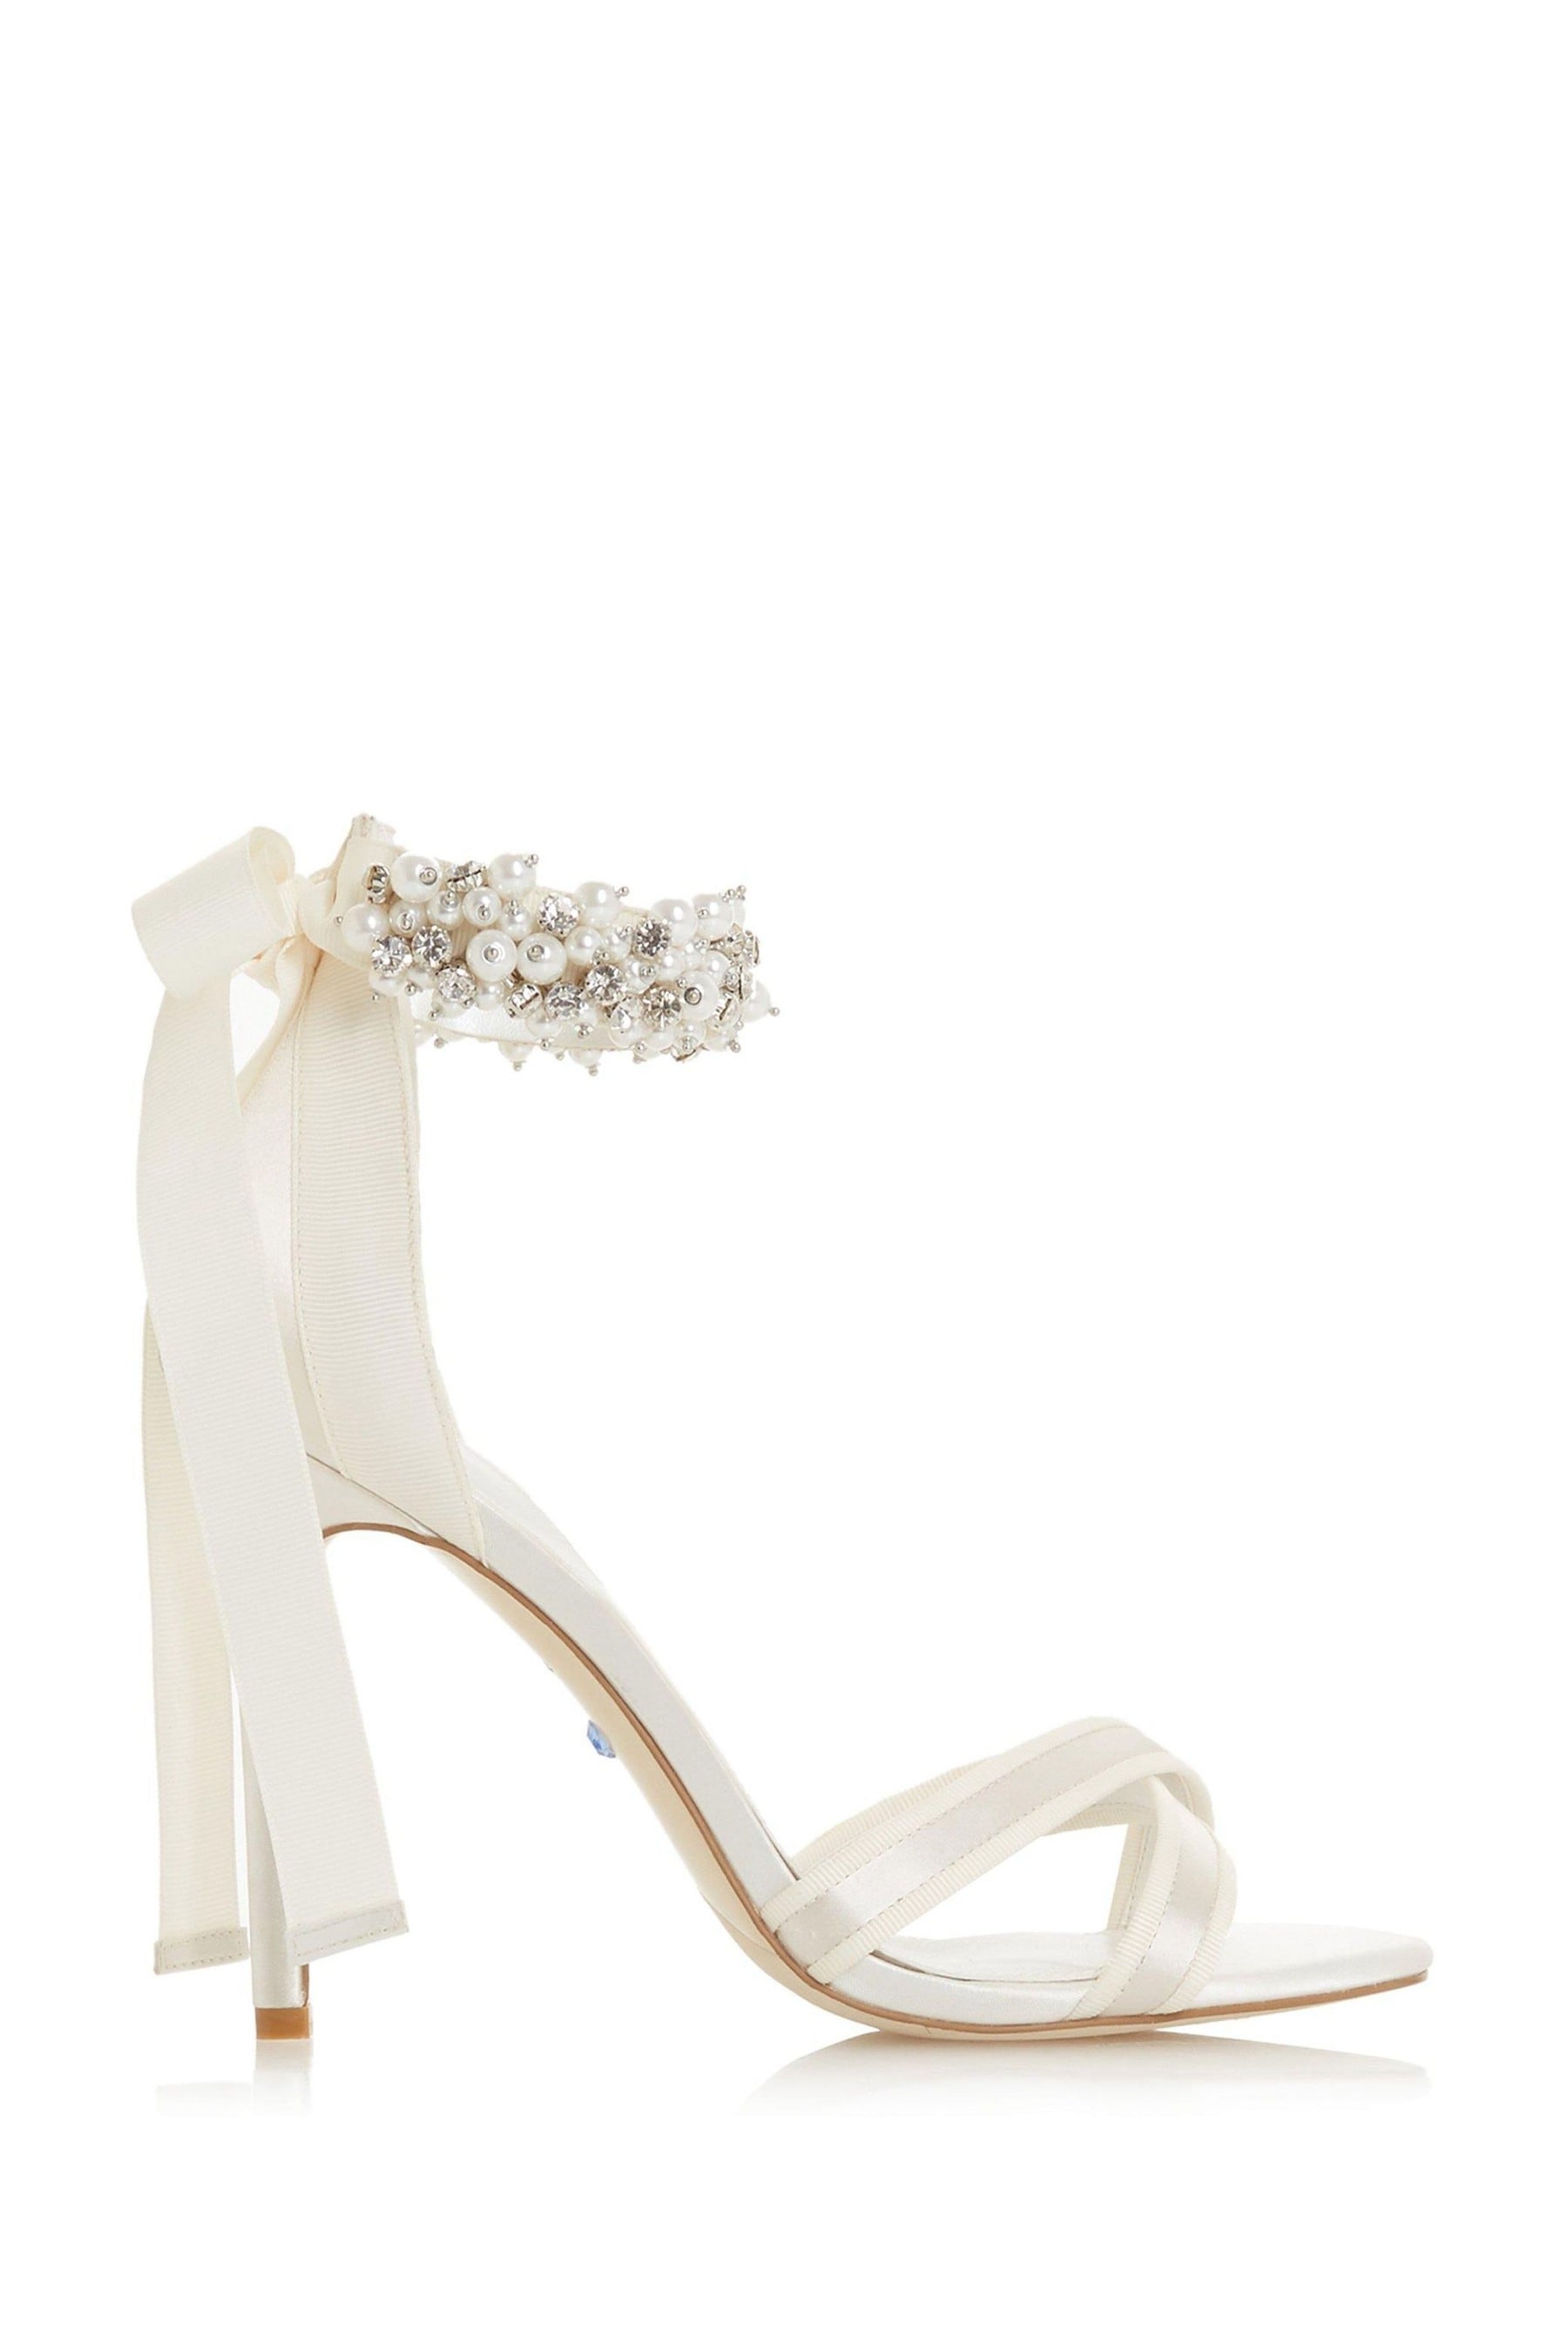 Buy Dune London Martine Ivory Satin Embellished Ankle Tie Court from ...